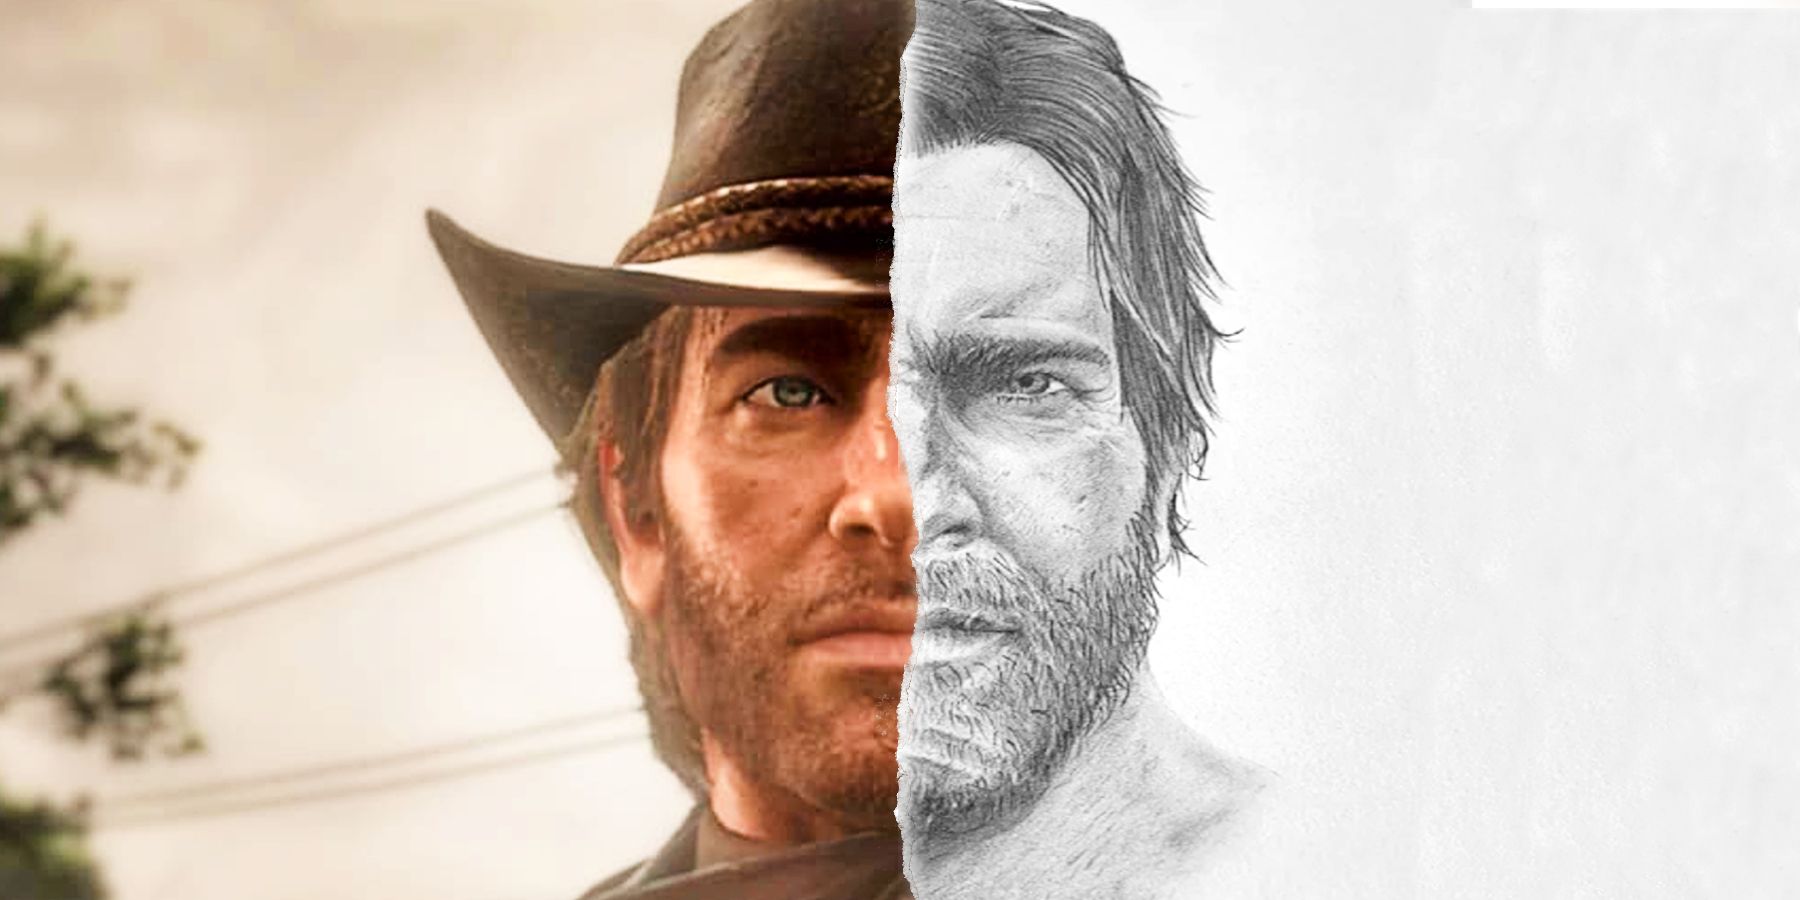 Red Dead Redemption 2: Who is Arthur Morgan?